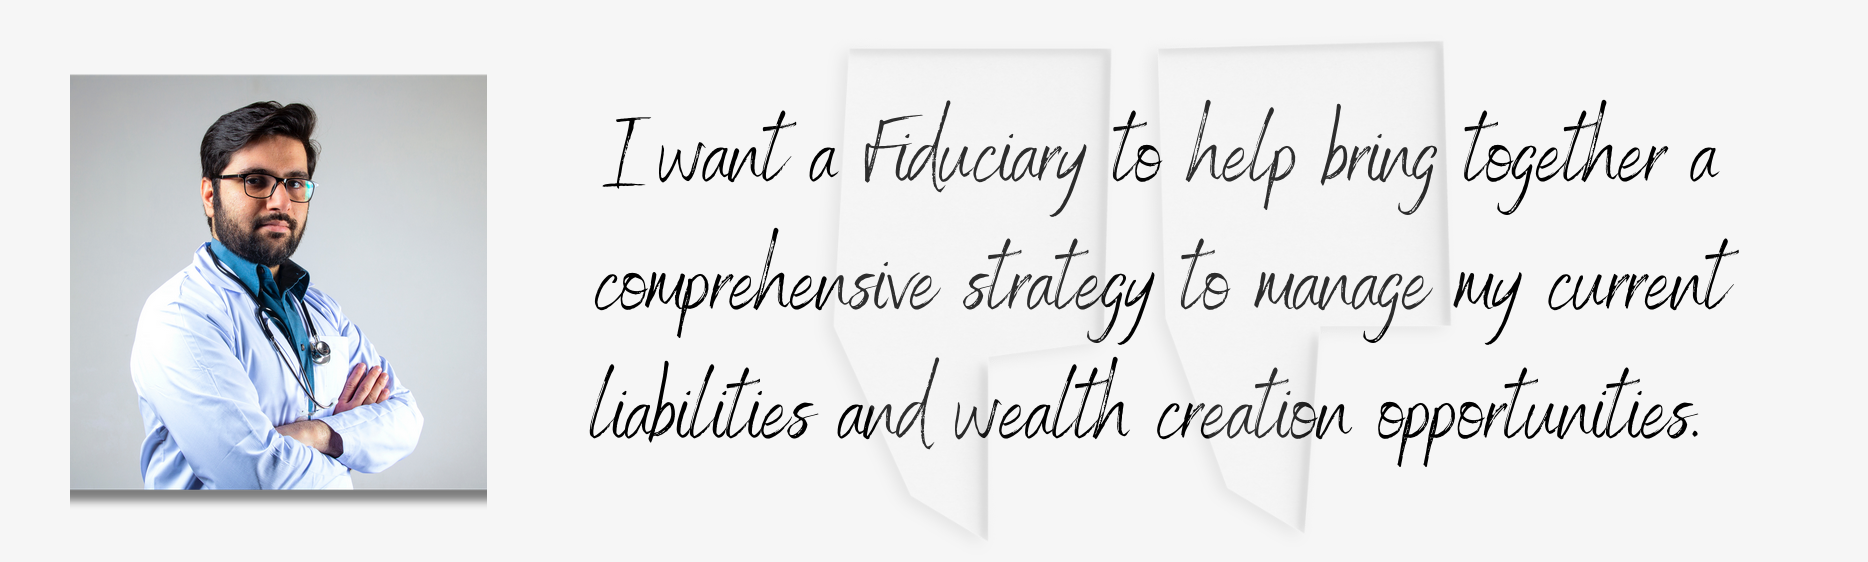 I want a Fiduciary to help bring together a comprehensive strategy to manage my current liabilities and wealth creation opportunities.